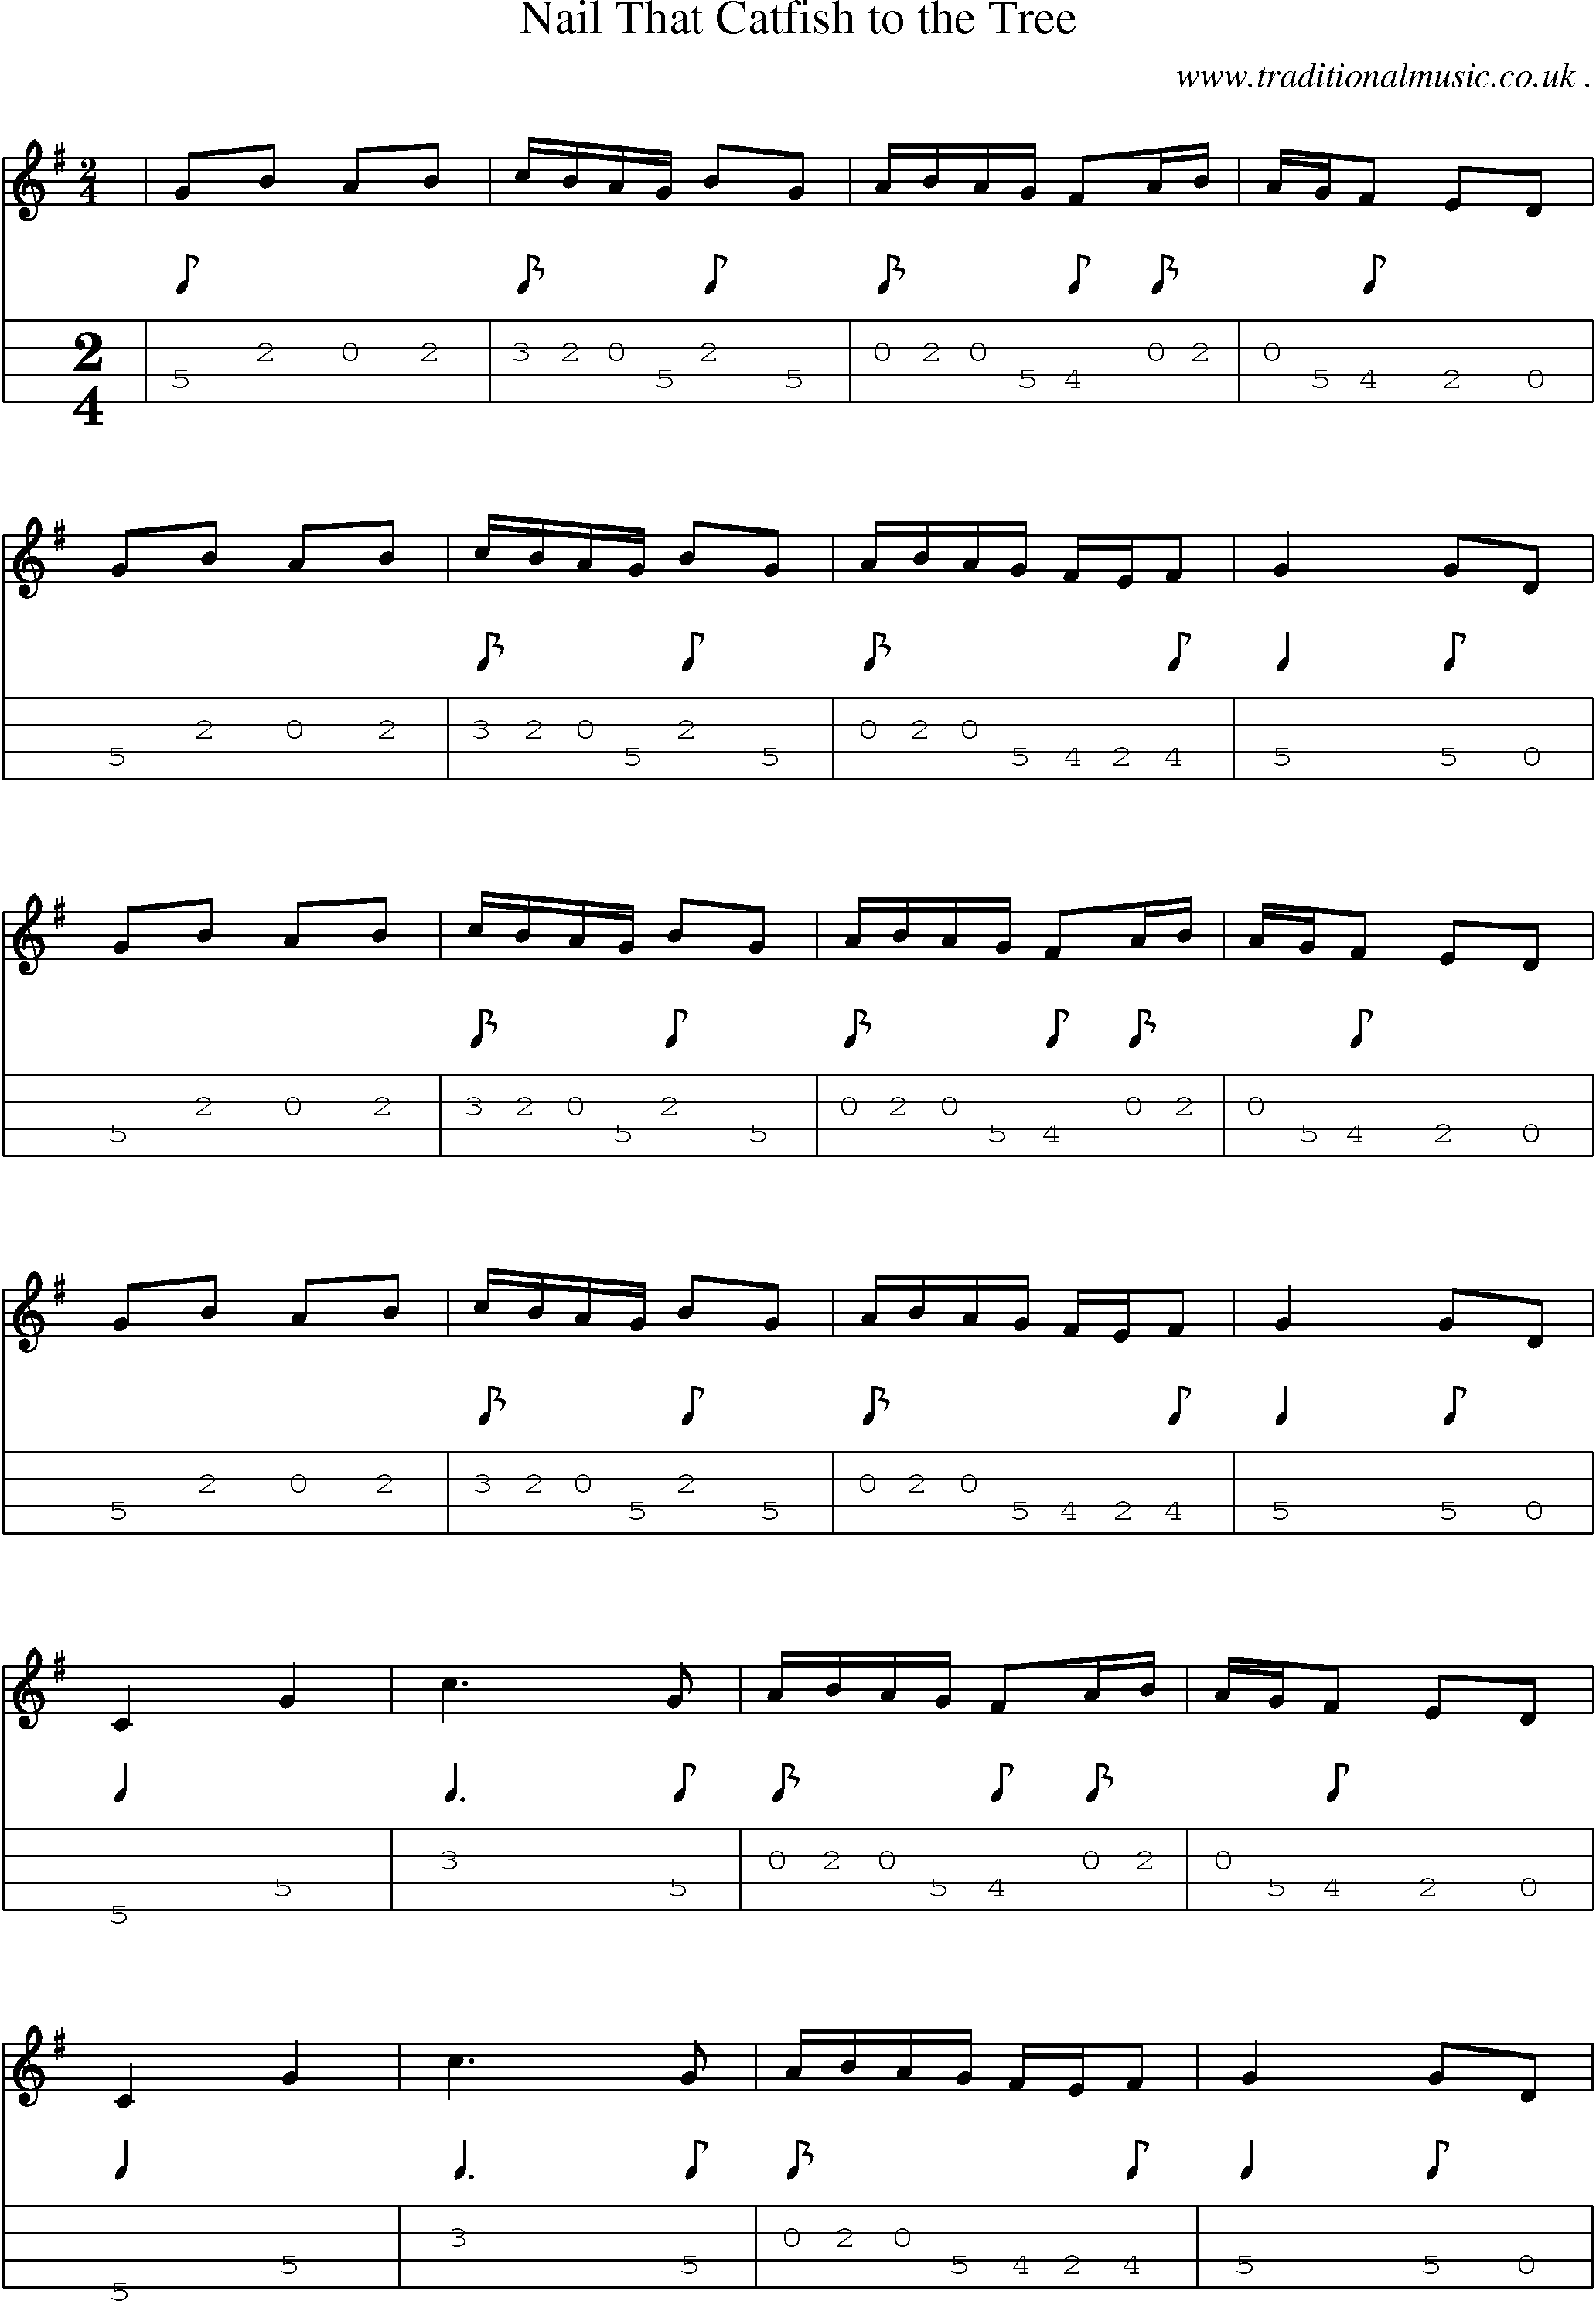 Sheet-Music and Mandolin Tabs for Nail That Catfish To The Tree